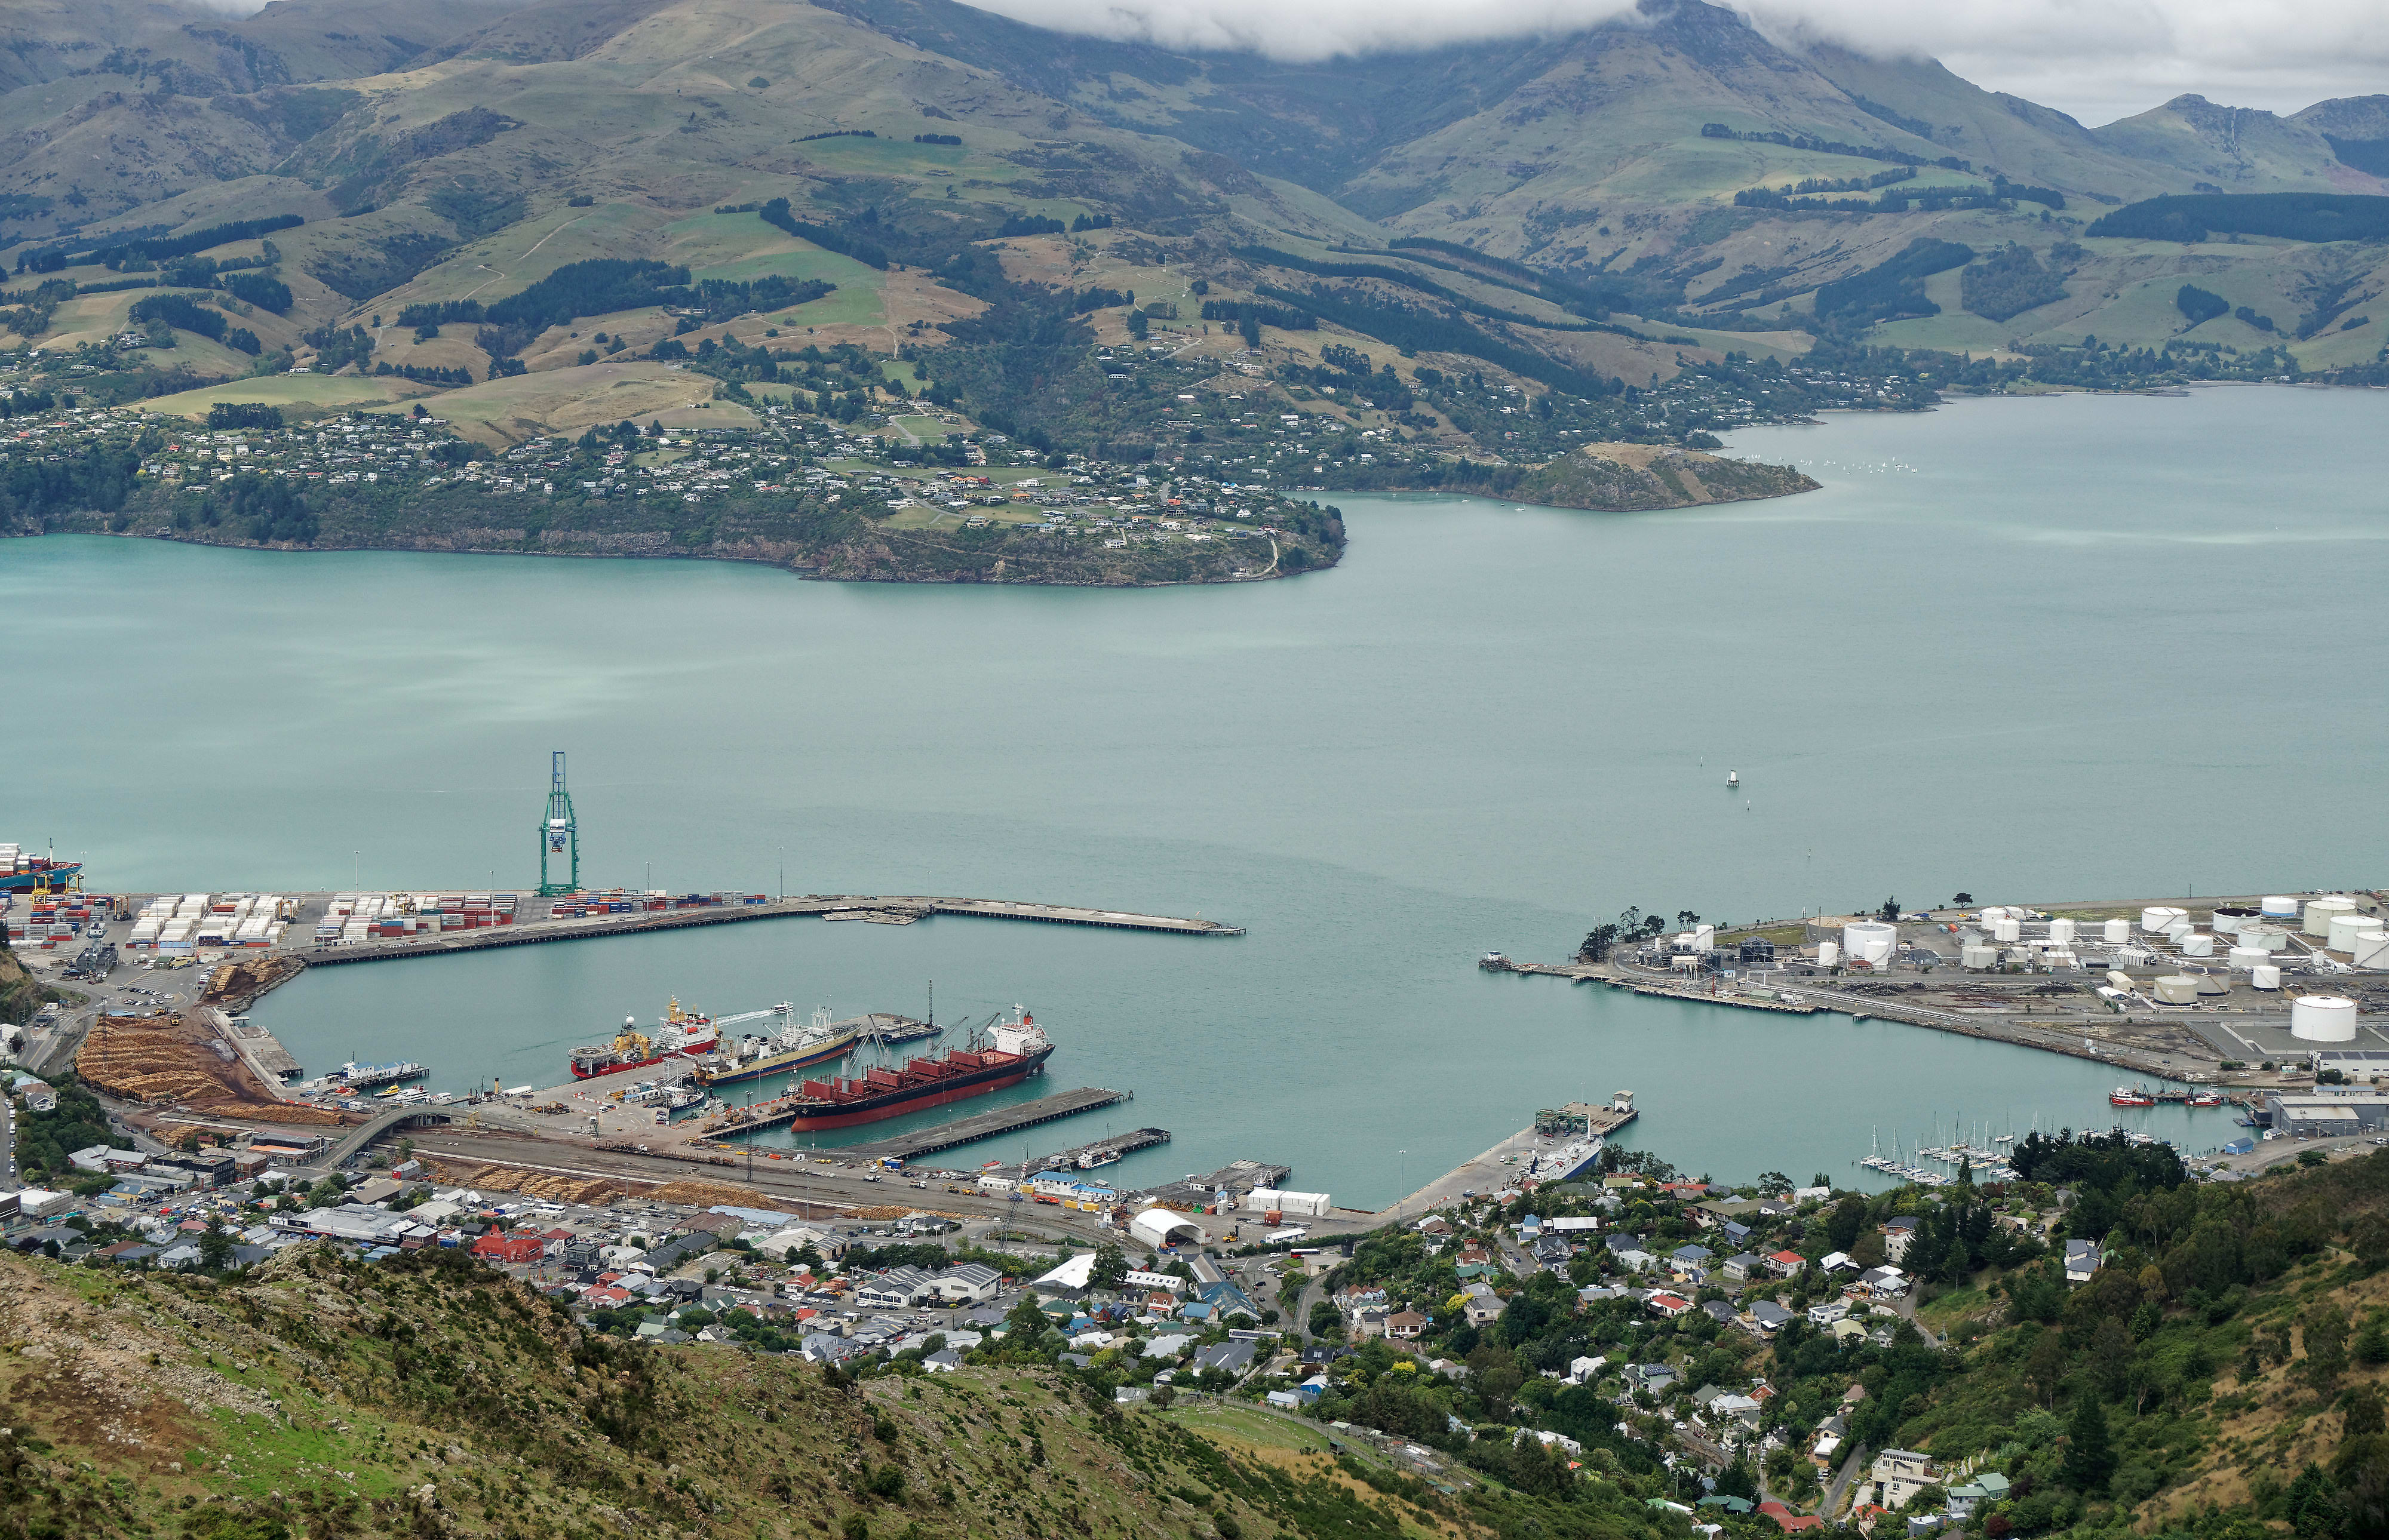 Lyttelton Harbour as seen from the Port Hills.